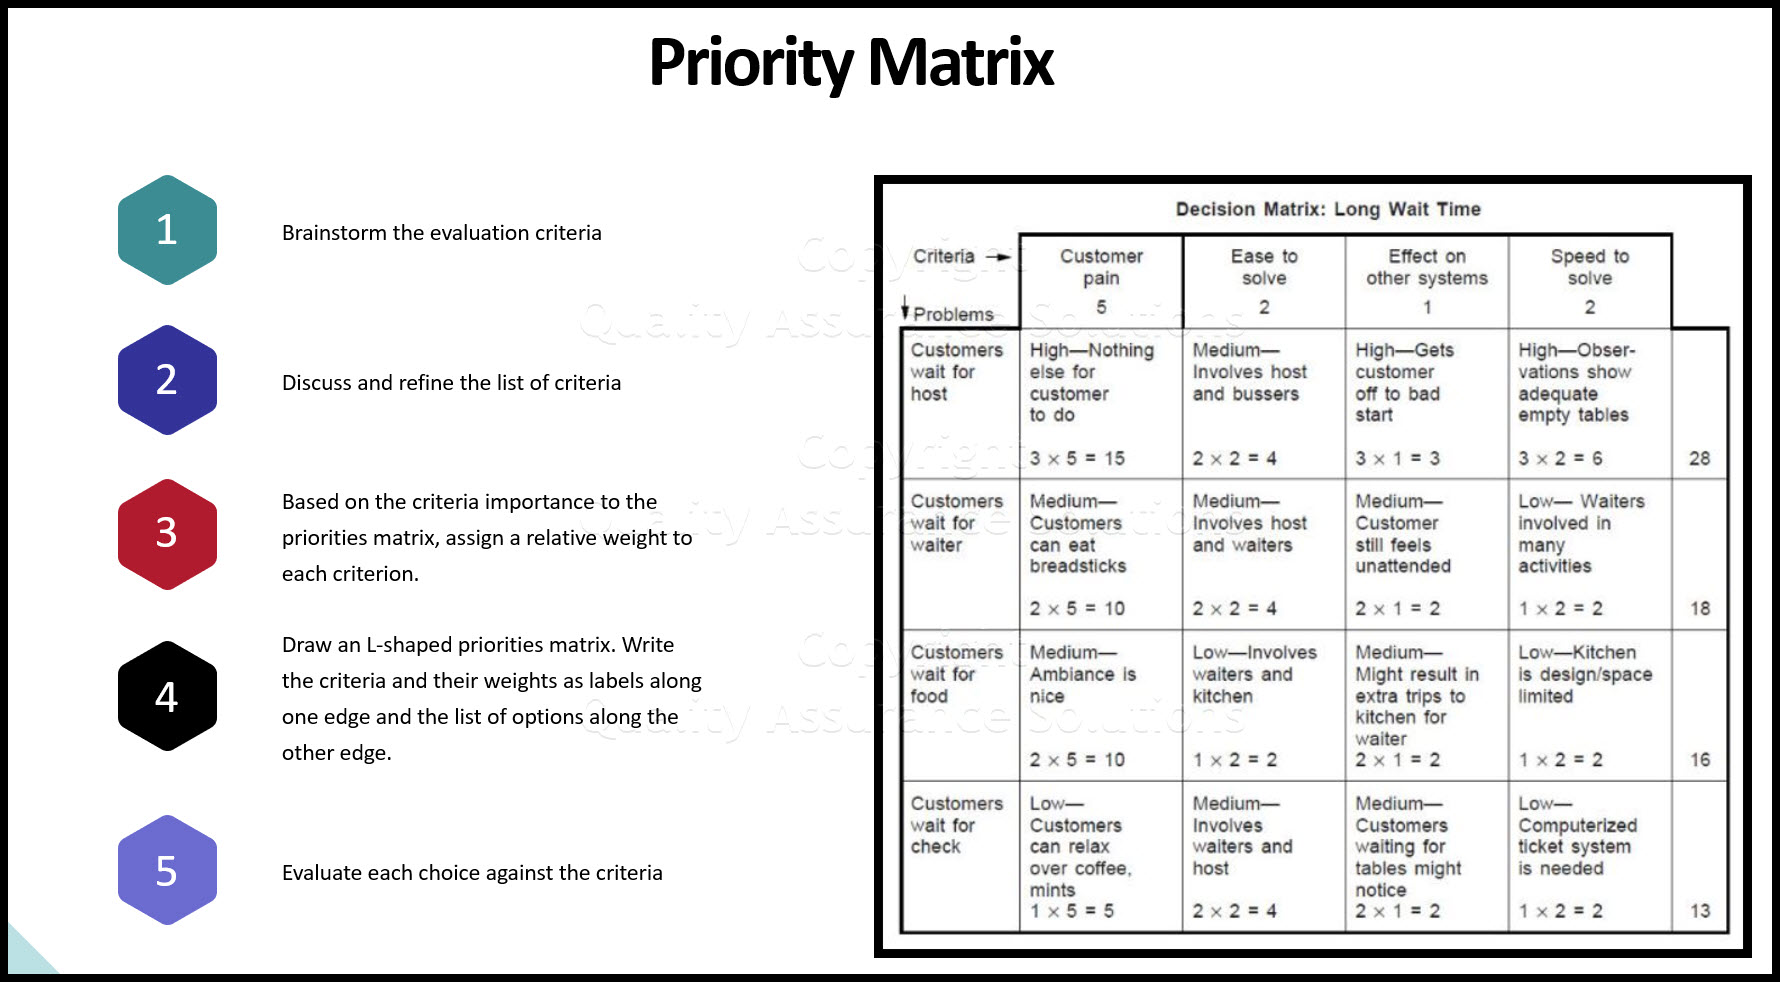 A priorities matrix evaluates and prioritizes a list of options. Learn to formally construct one and analyze the results.